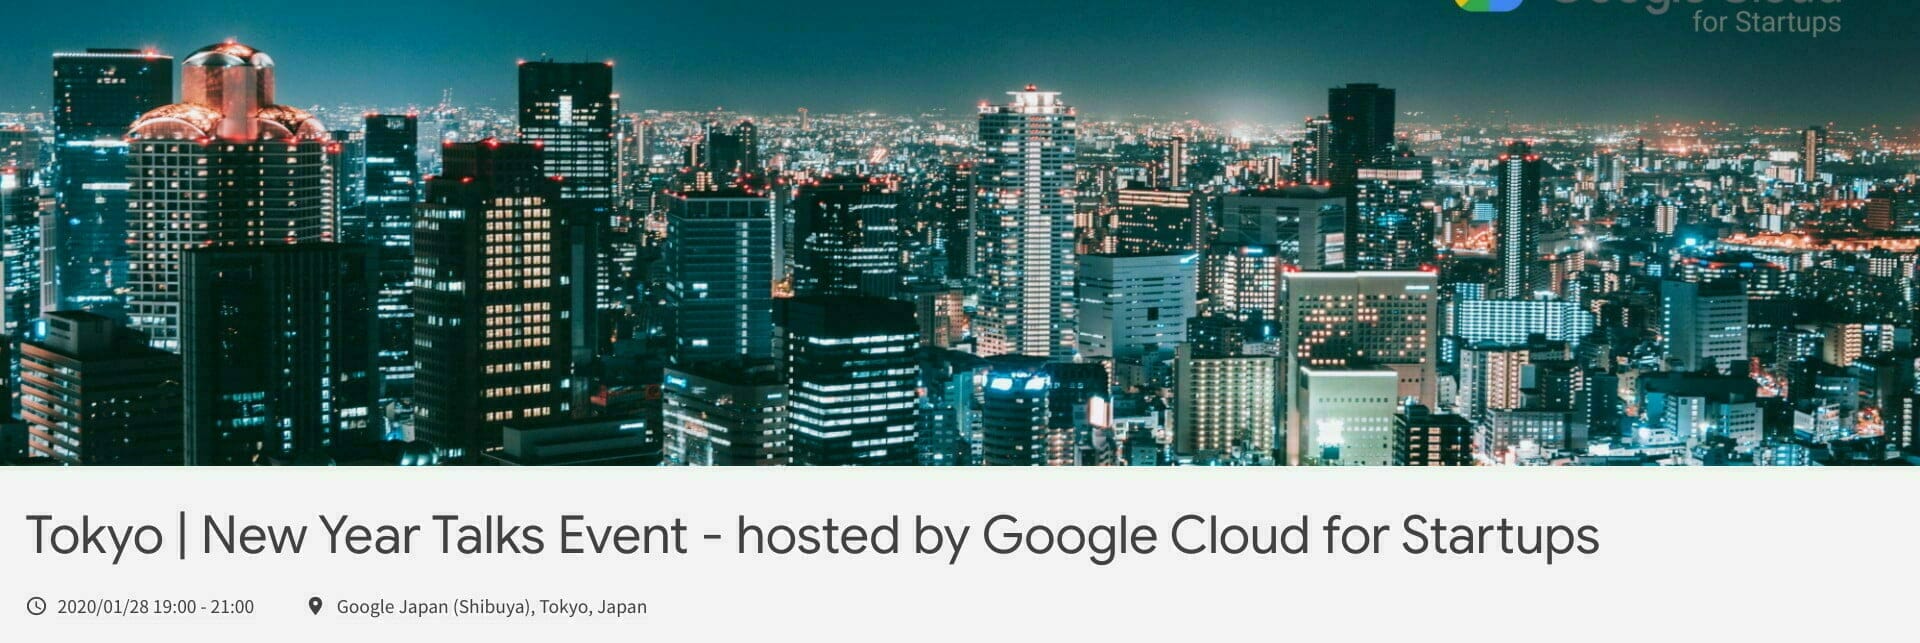 Tokyo | New Year Talks Event - hosted by Google Cloud for Startups